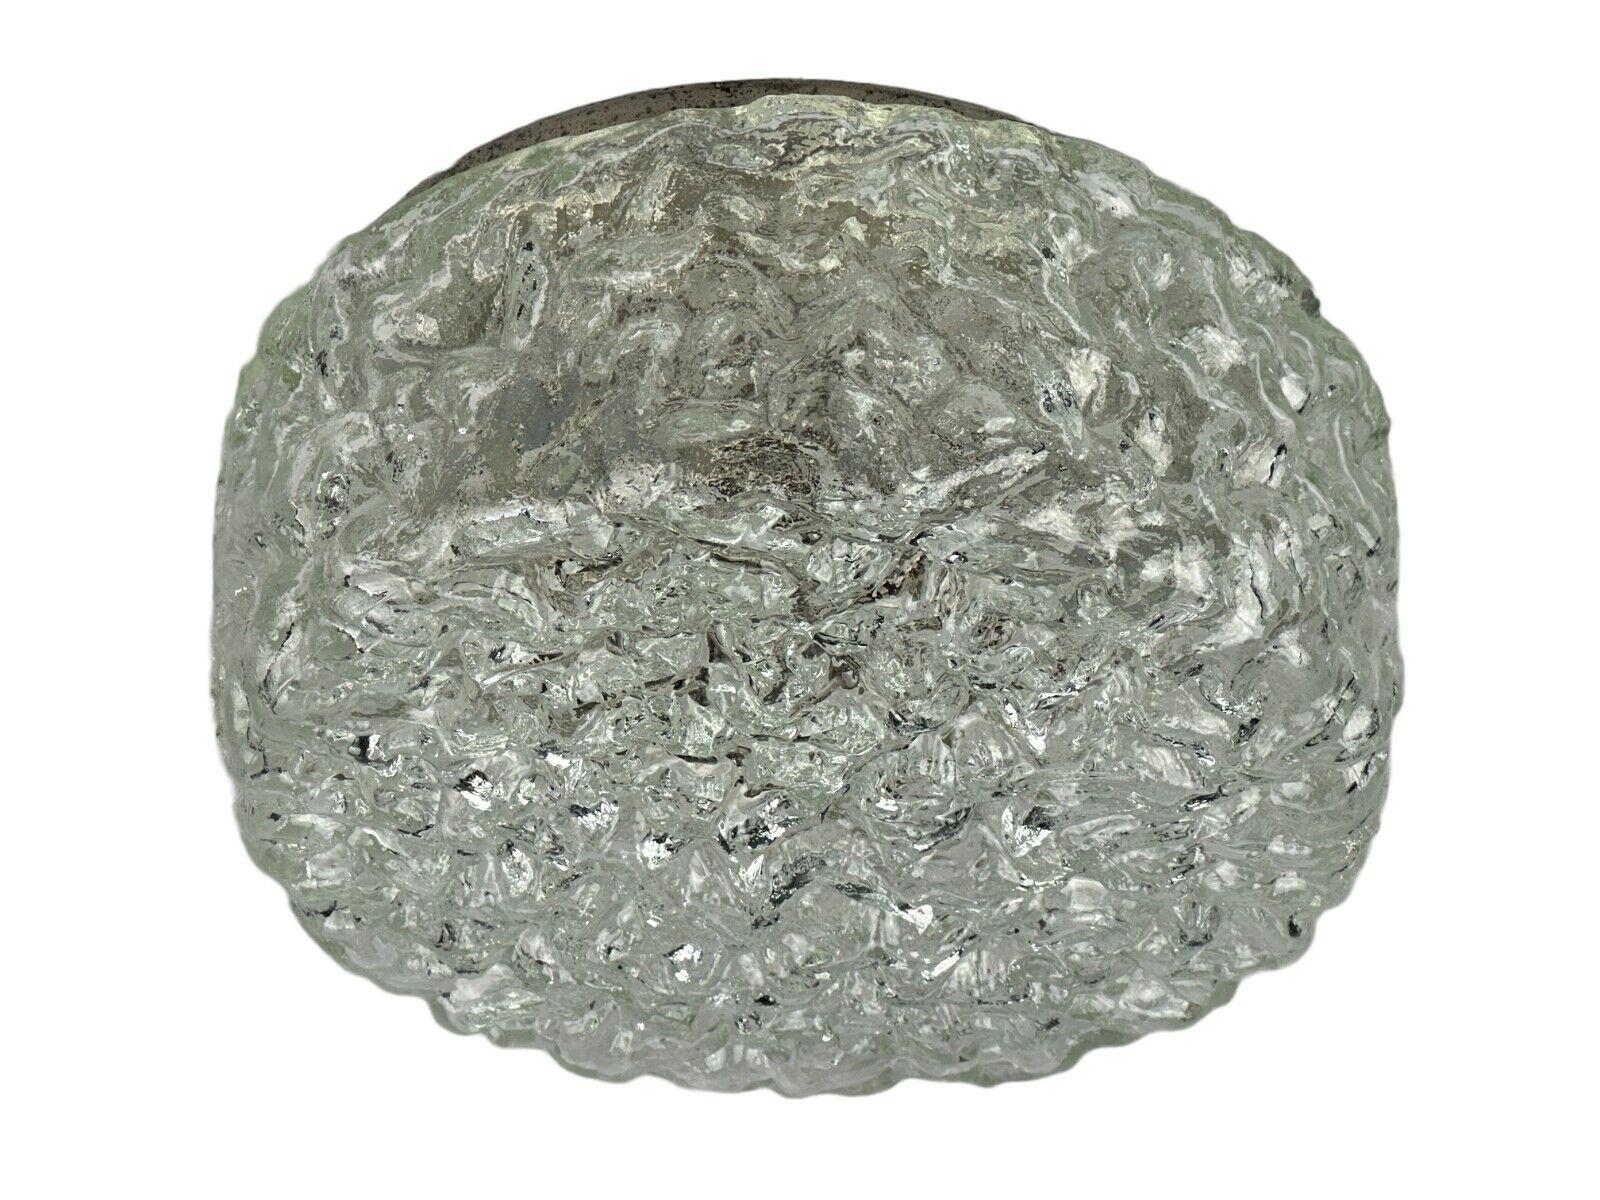 60s 70s ceiling lamp Glashütte Limburg Germany Plafoniere glass & metal

Object: wall lamp

Manufacturer: Glashütte Limburg

Condition: good

Age: around 1960-1970

Dimensions:

Diameter = 20cm
Height = 10cm

Material: glass, metal

Other